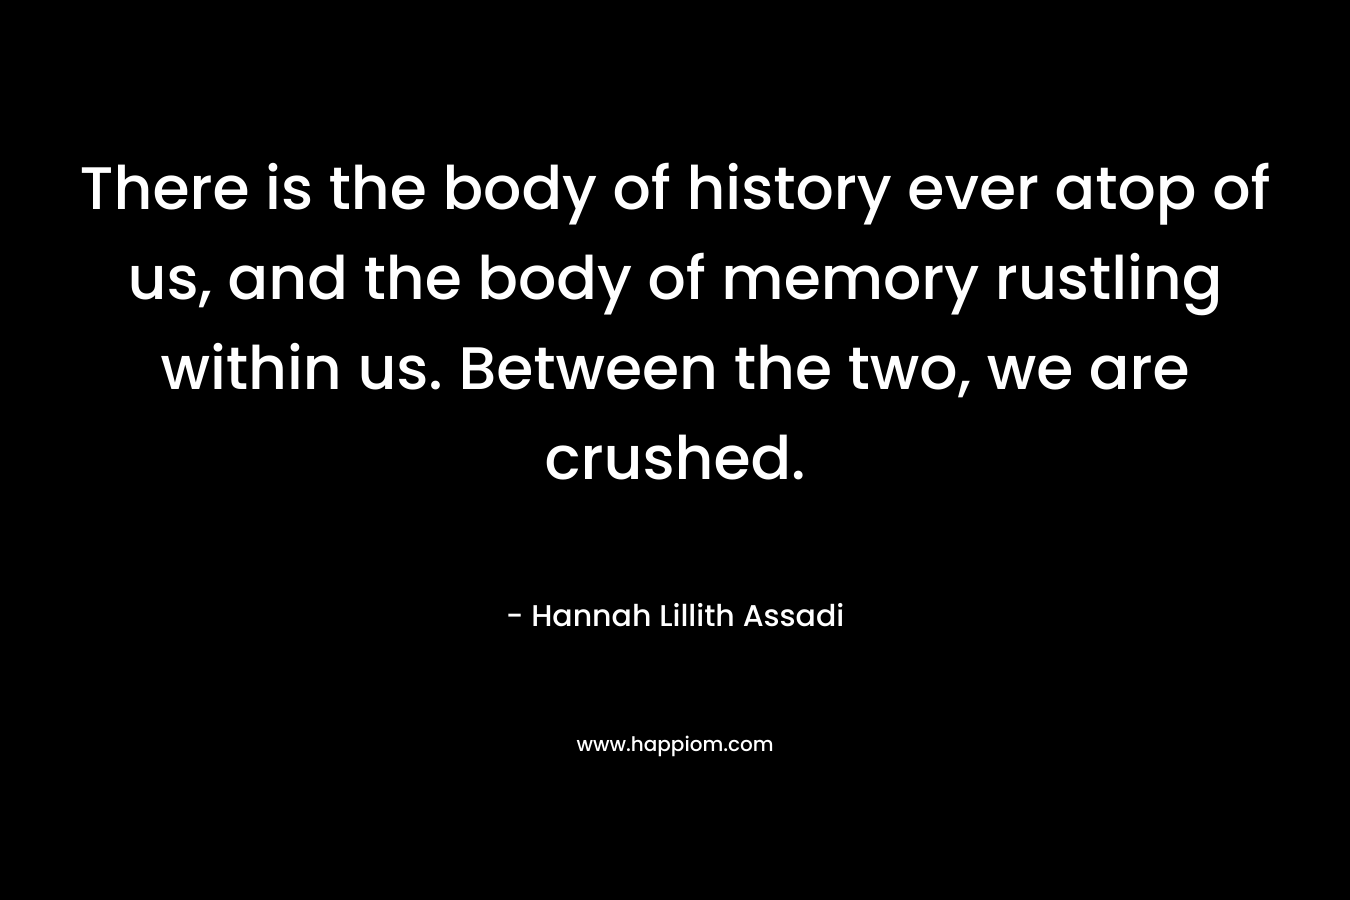 There is the body of history ever atop of us, and the body of memory rustling within us. Between the two, we are crushed. – Hannah Lillith Assadi